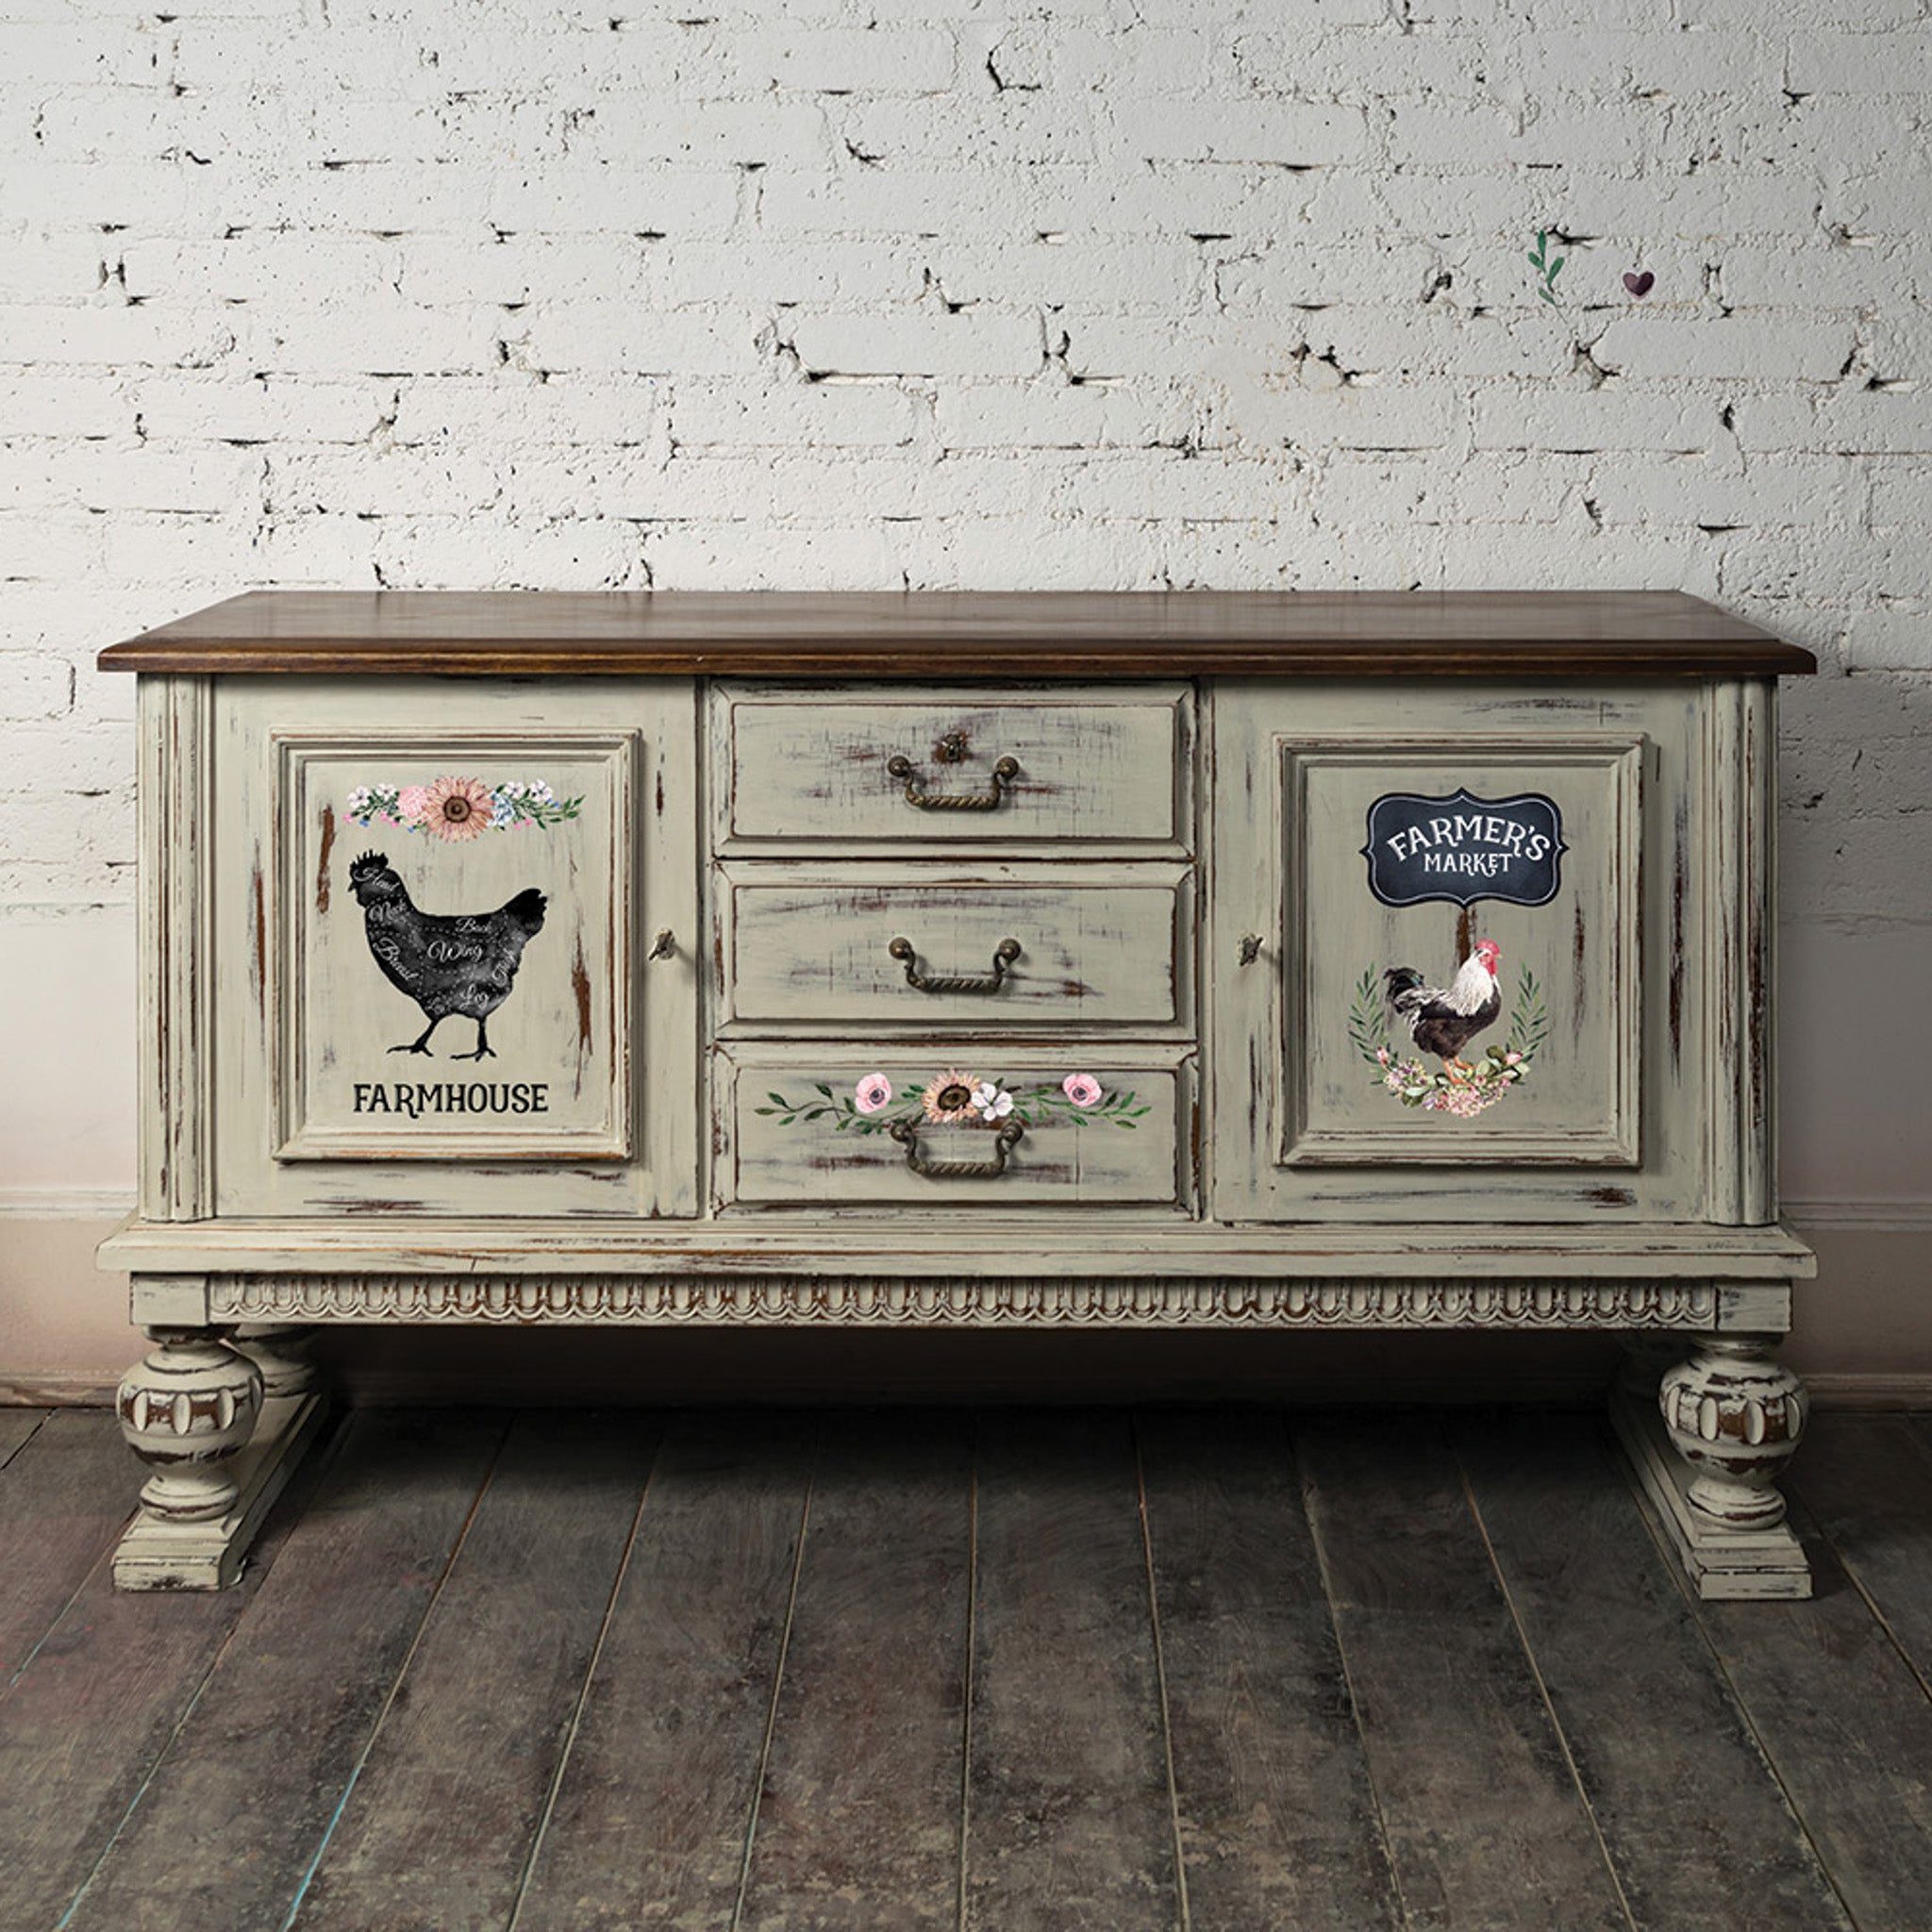 A vintage buffet table is painted a distressed beige with a natural wood top and features ReDesign with Prima's Morning Farmhouse small transfer on its doors and bottom drawer.